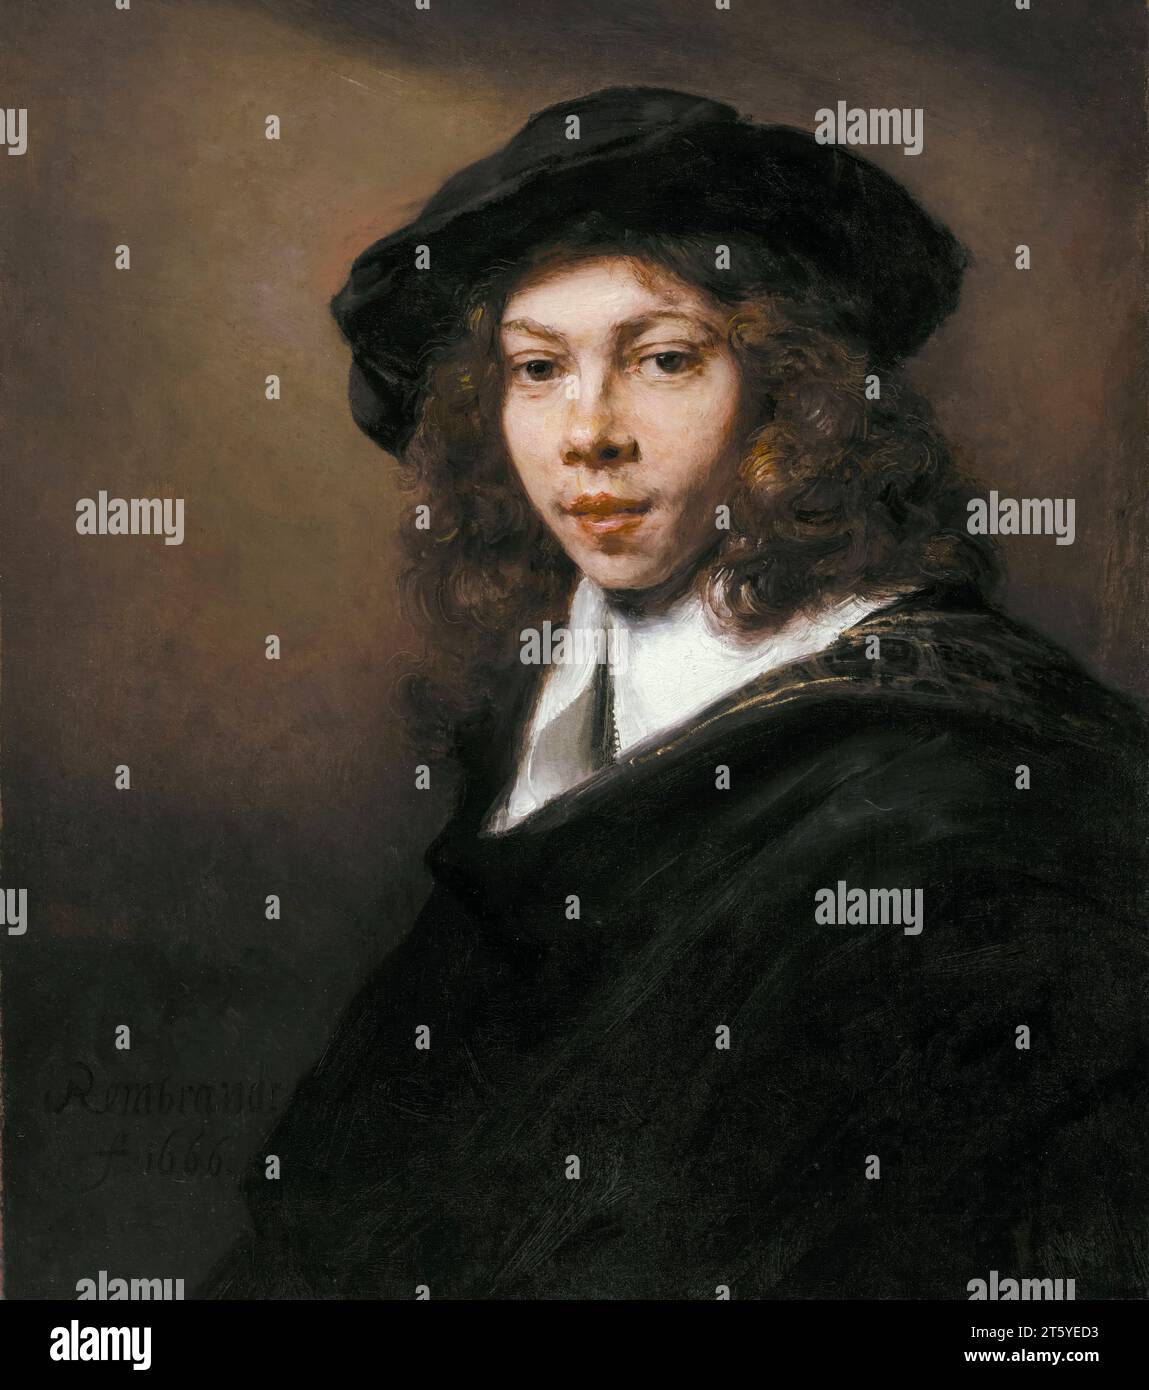 Rembrandt van Rijn, Young Man in a Black Beret, portrait painting in oil on canvas, 1666 Stock Photo